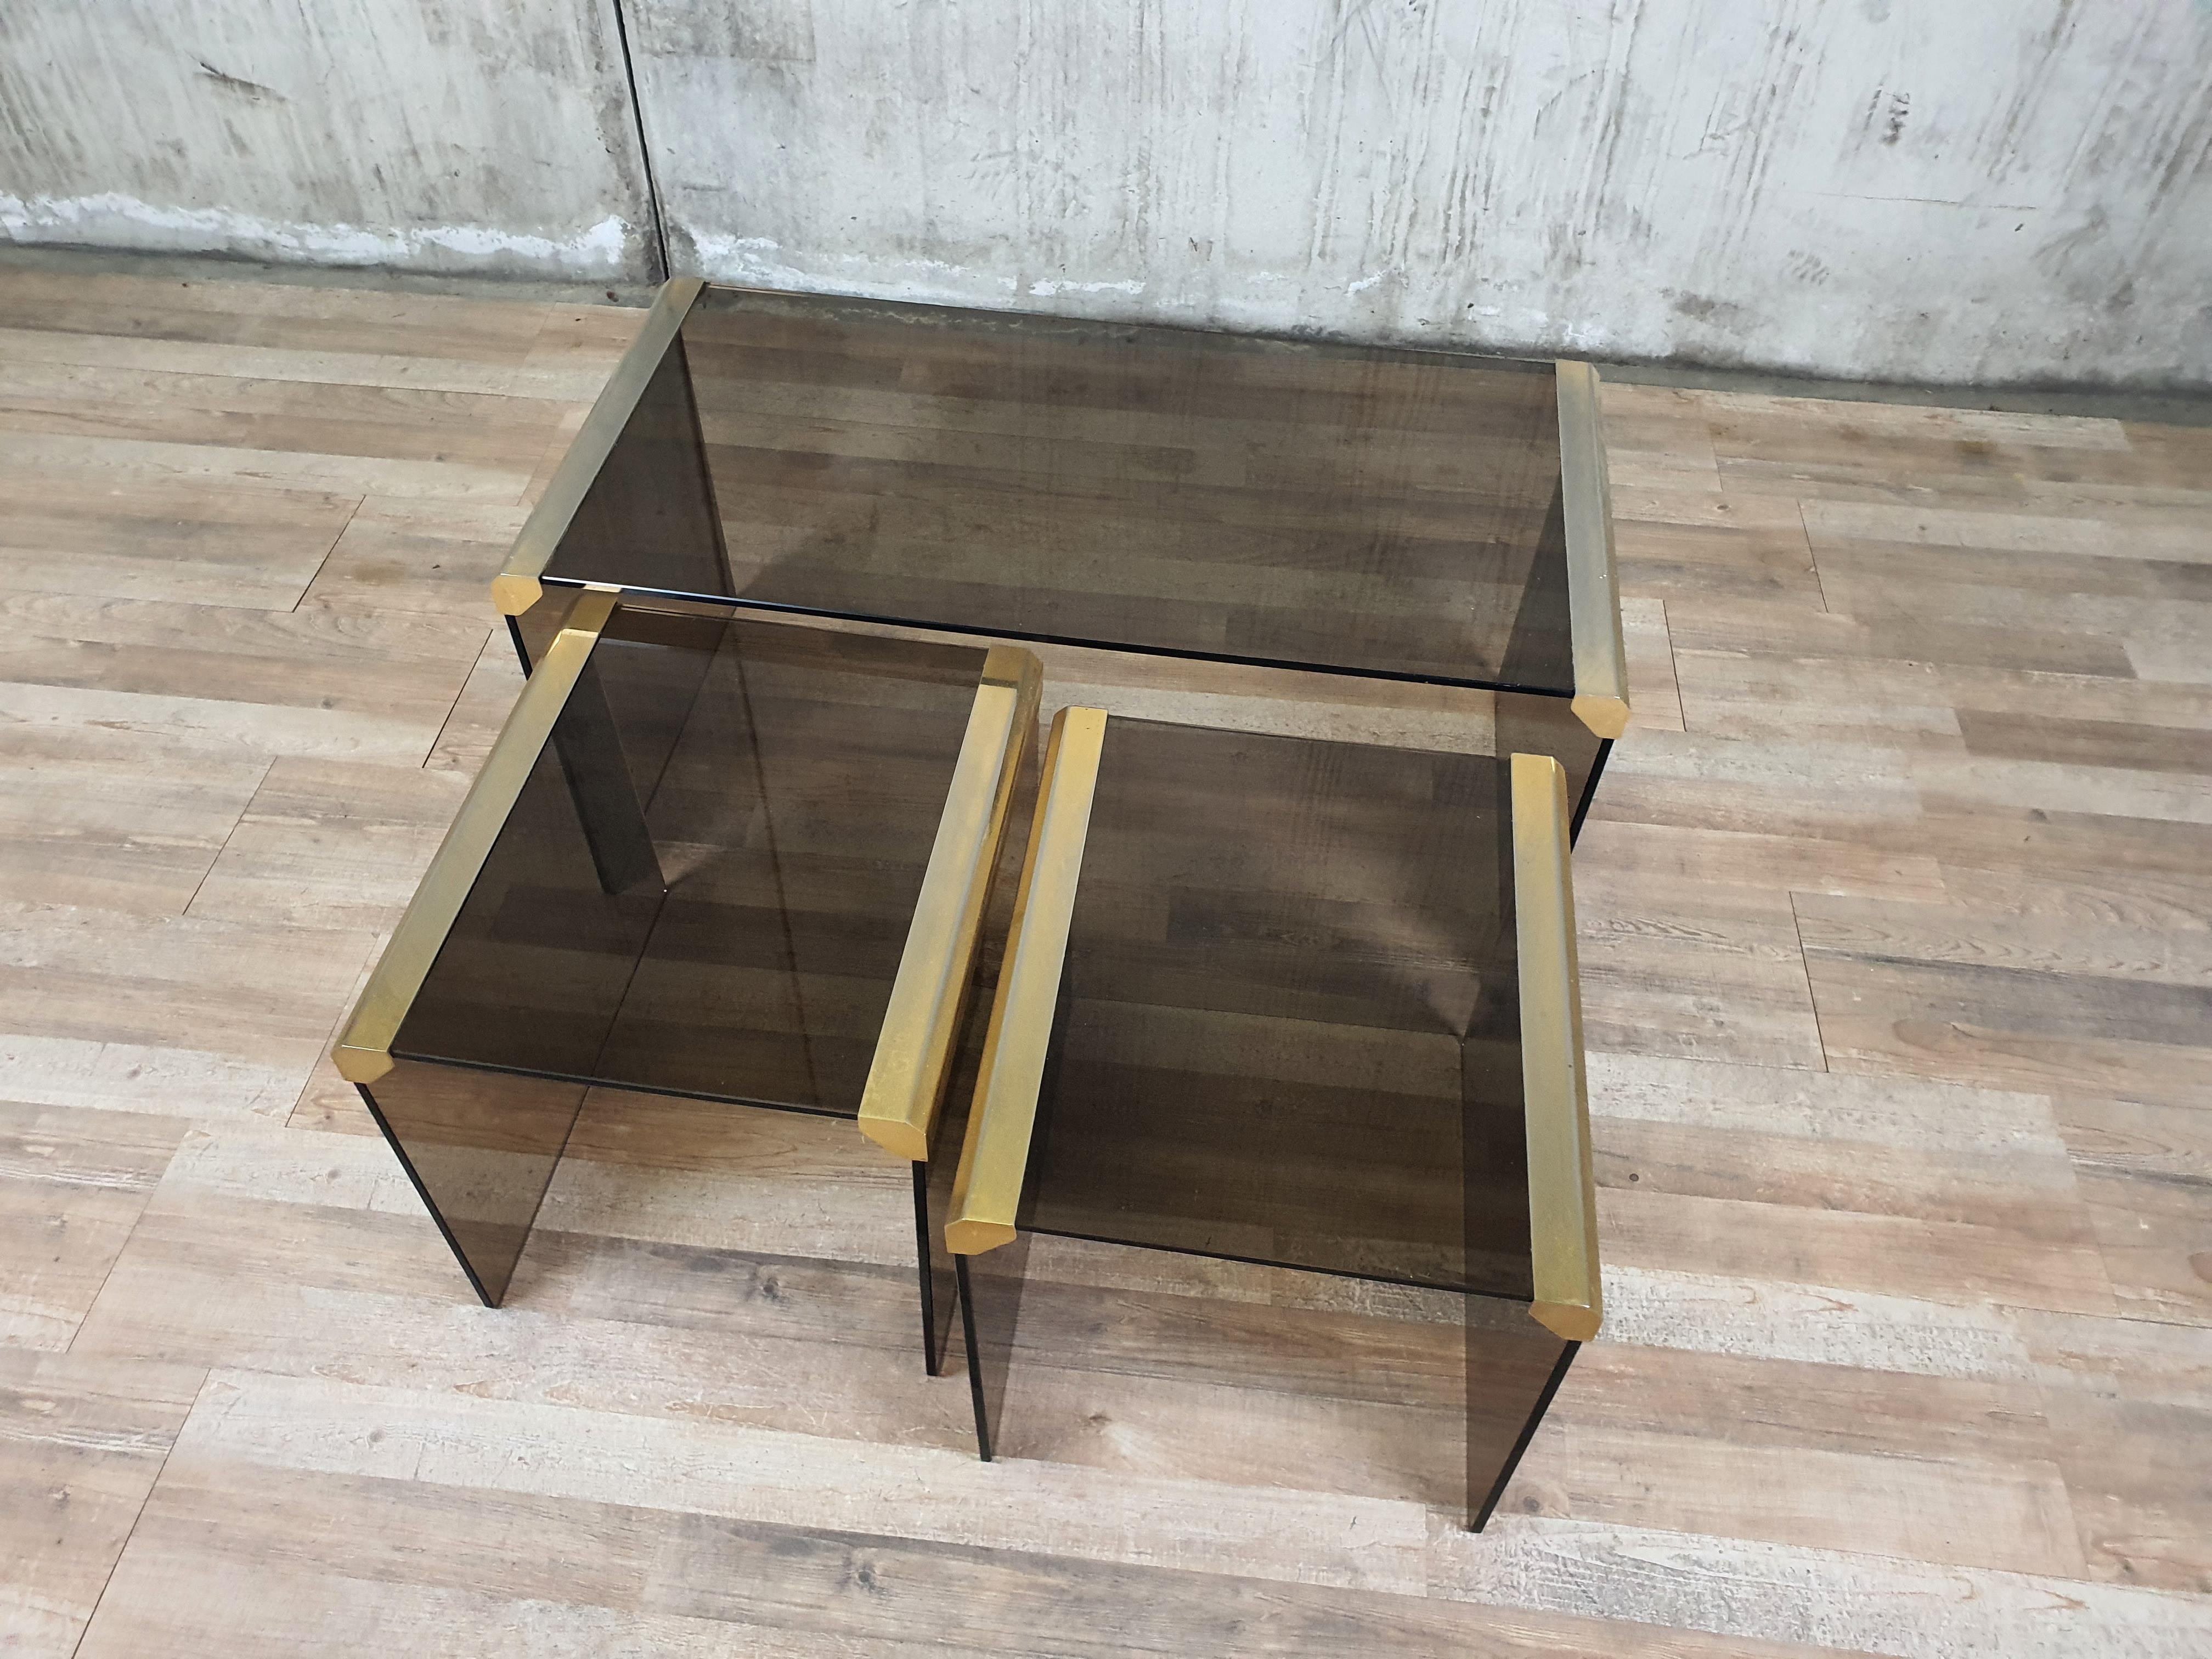 Steel and Smoked Glass Coffee Tables by P. Gallotti for Gallotti & Radice In Good Condition For Sale In Premariacco, IT